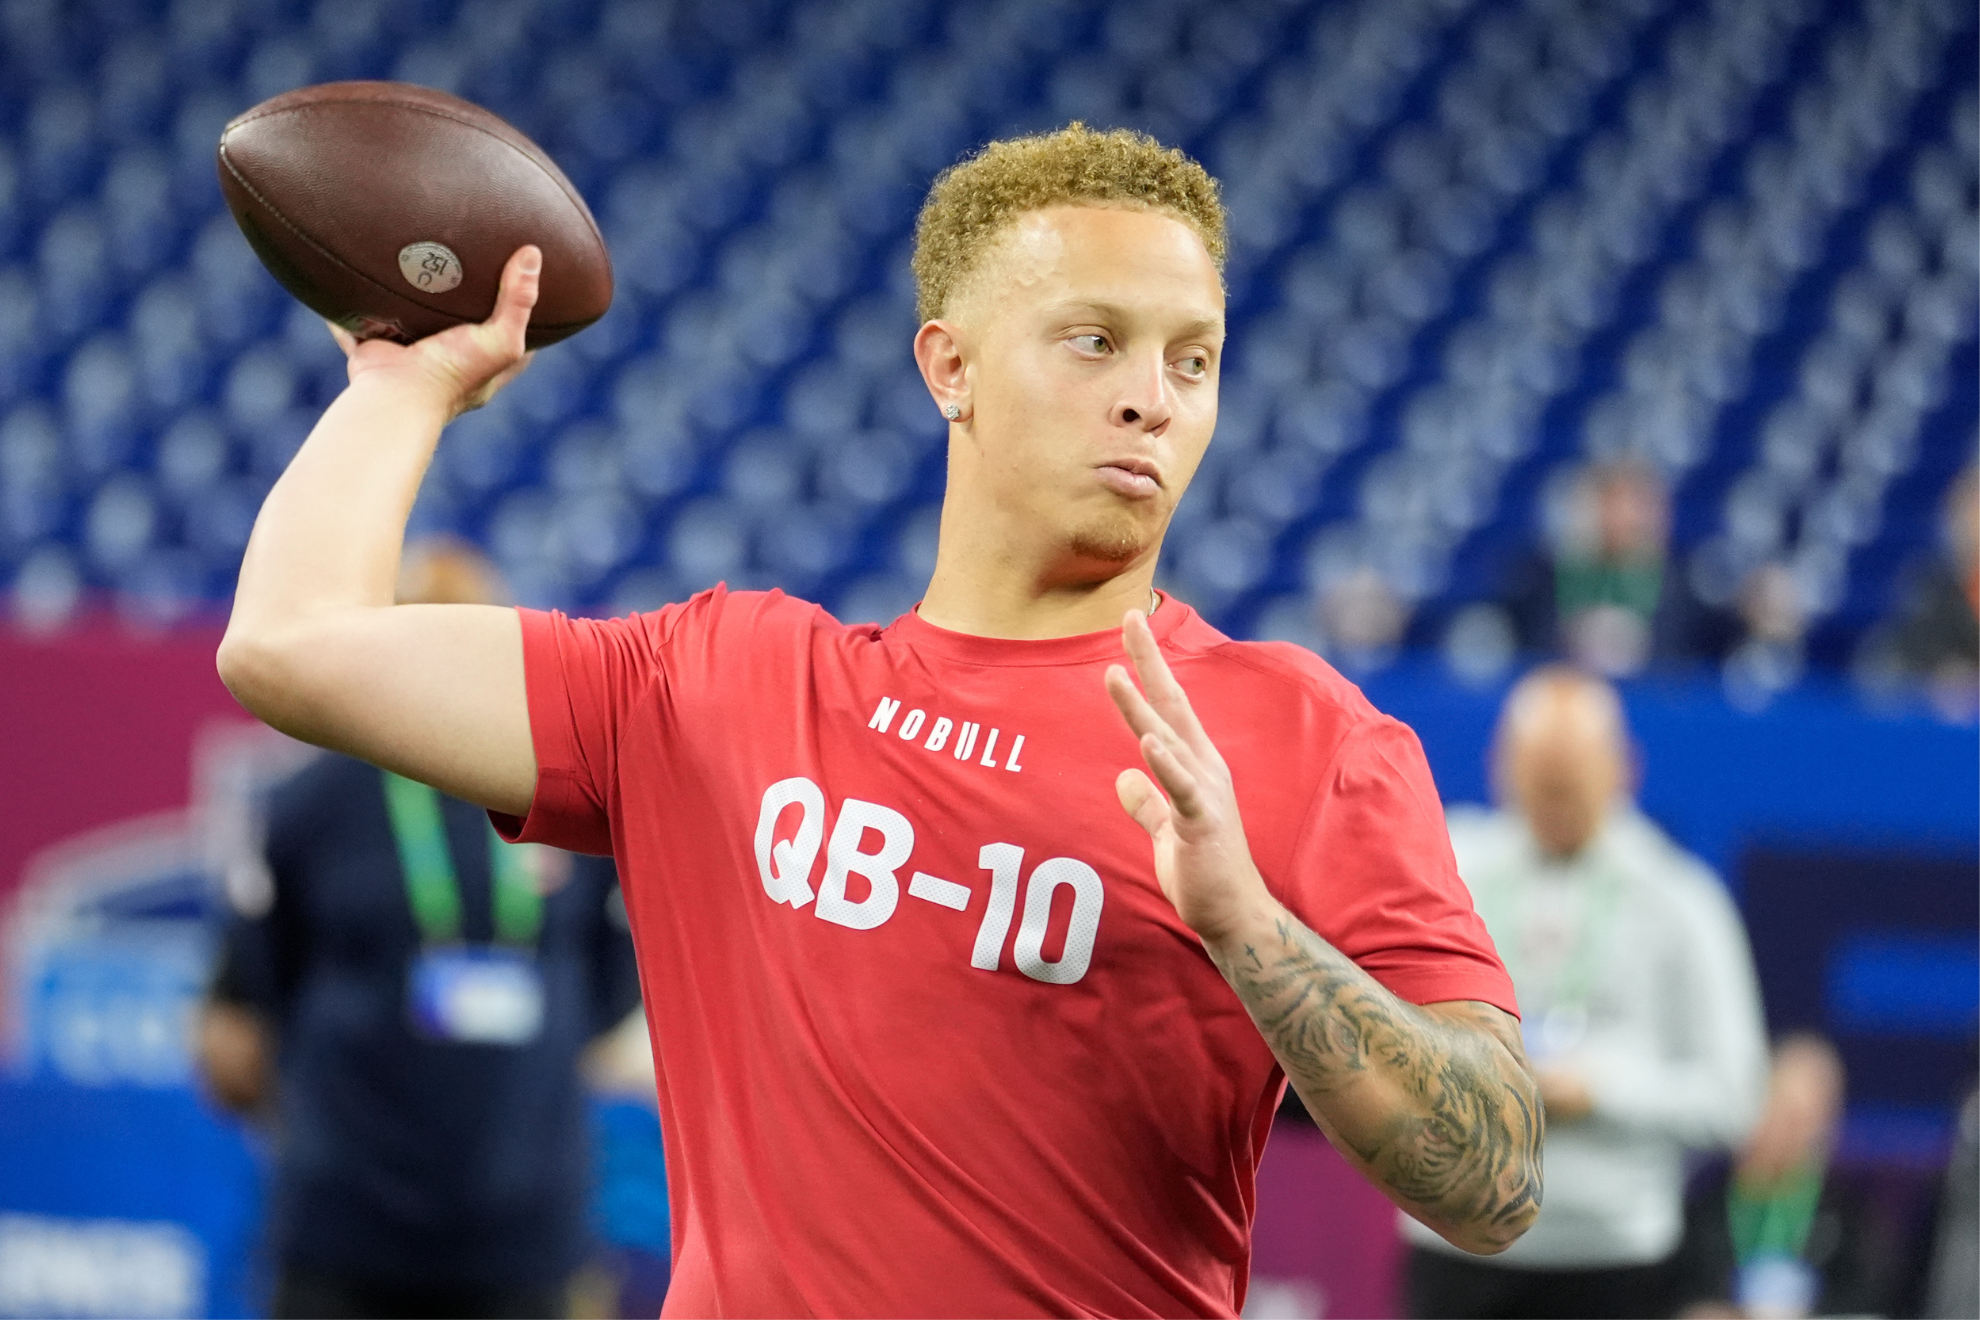 Spencer Rattler will have to overcome the odds amid character questions to become an NFL star